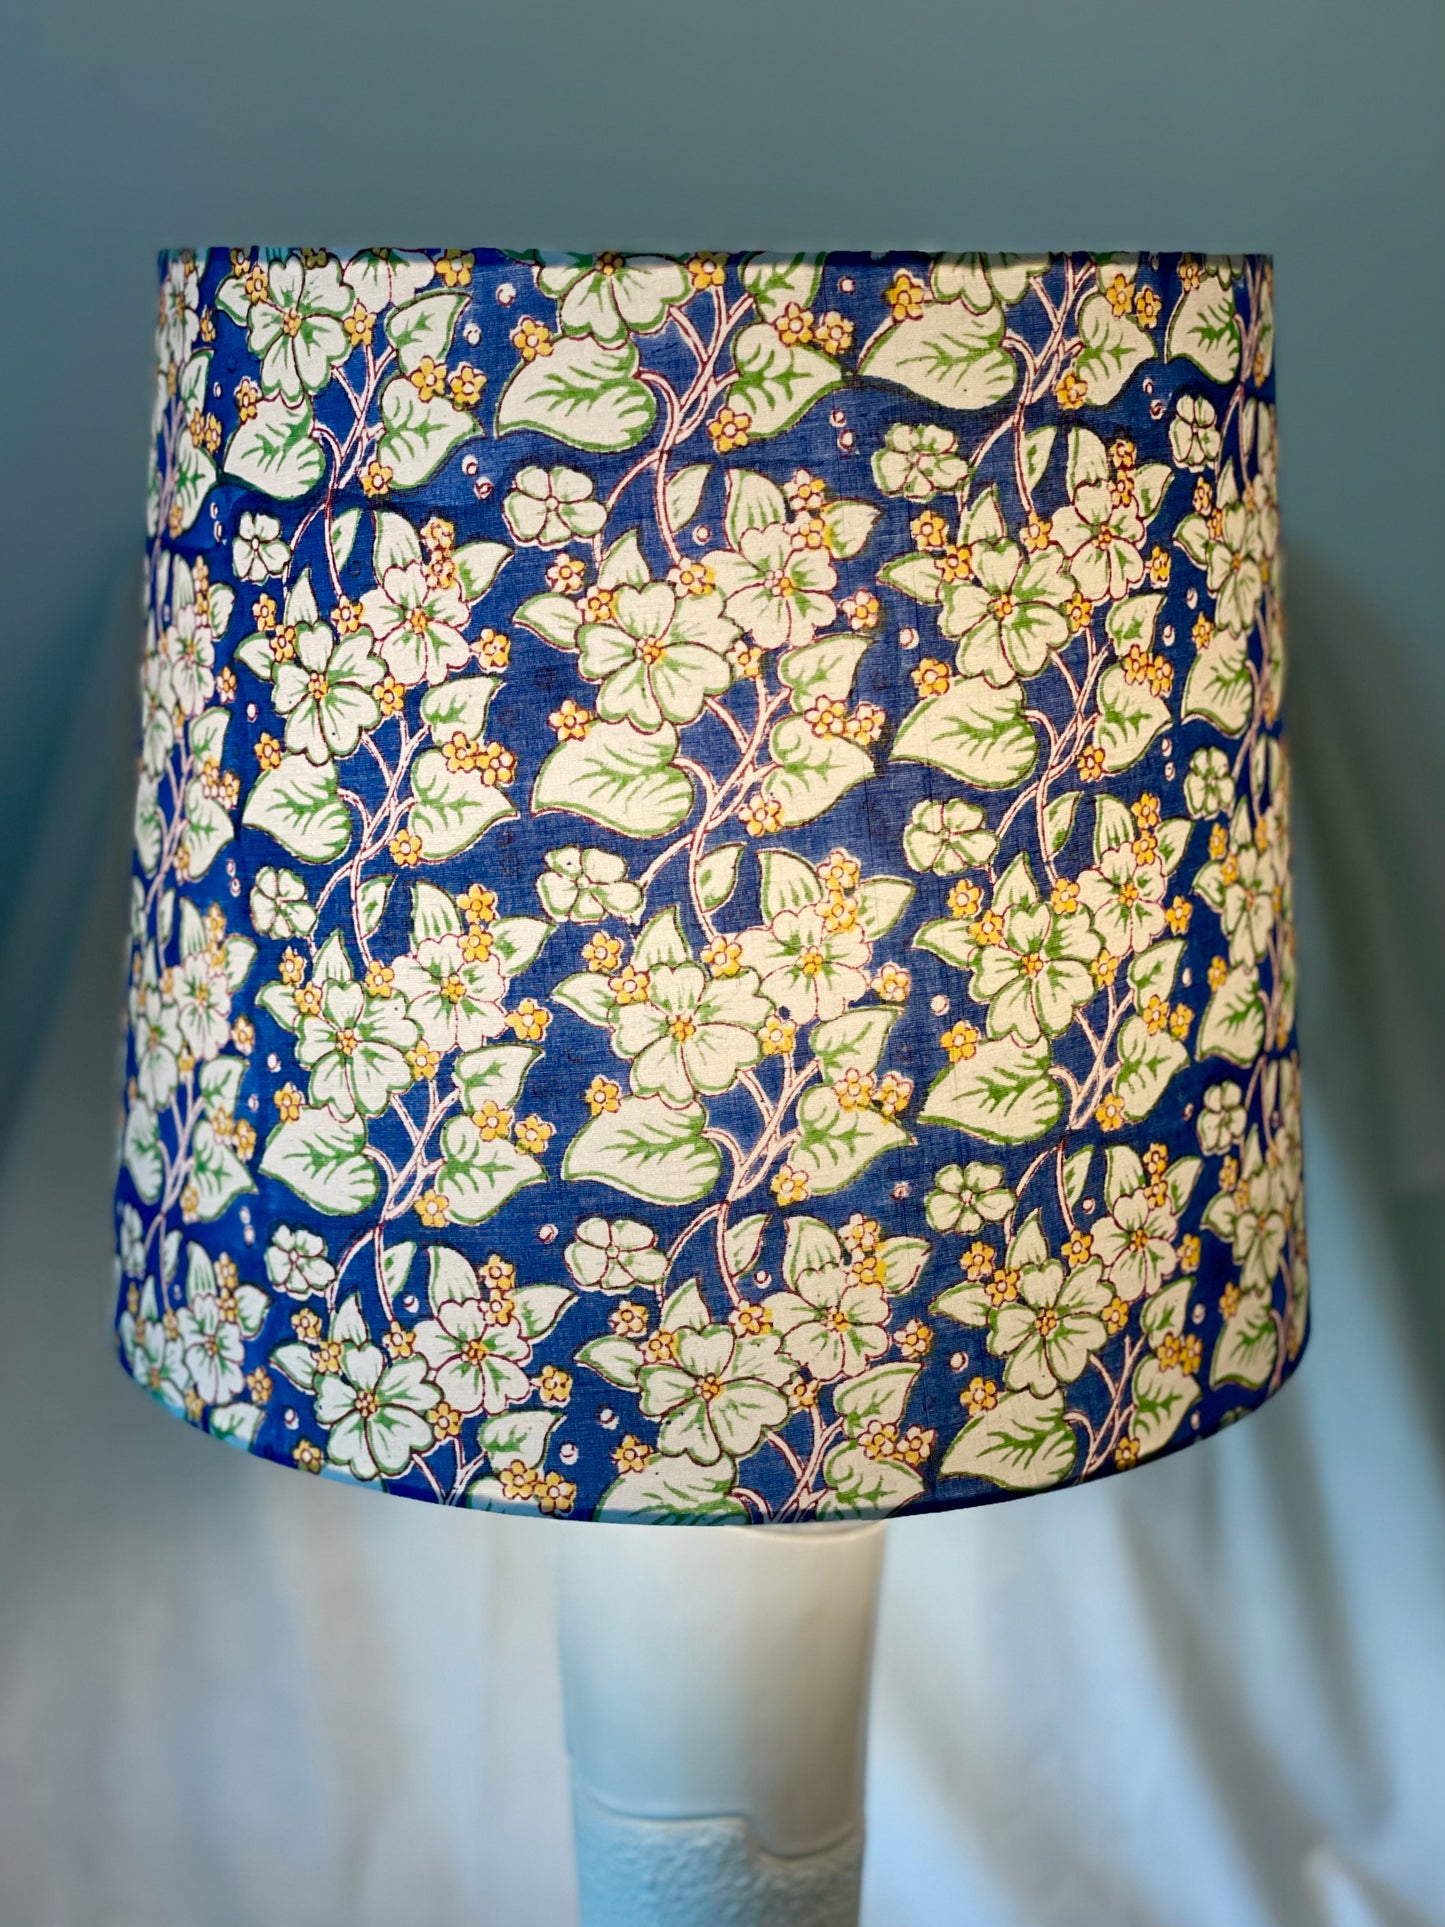 Large Empire Shade. 11.75 x 13.75 x 11.75. Indian Hand Block Print. Cobalt, Banana Yellow, and Ivory Floral.